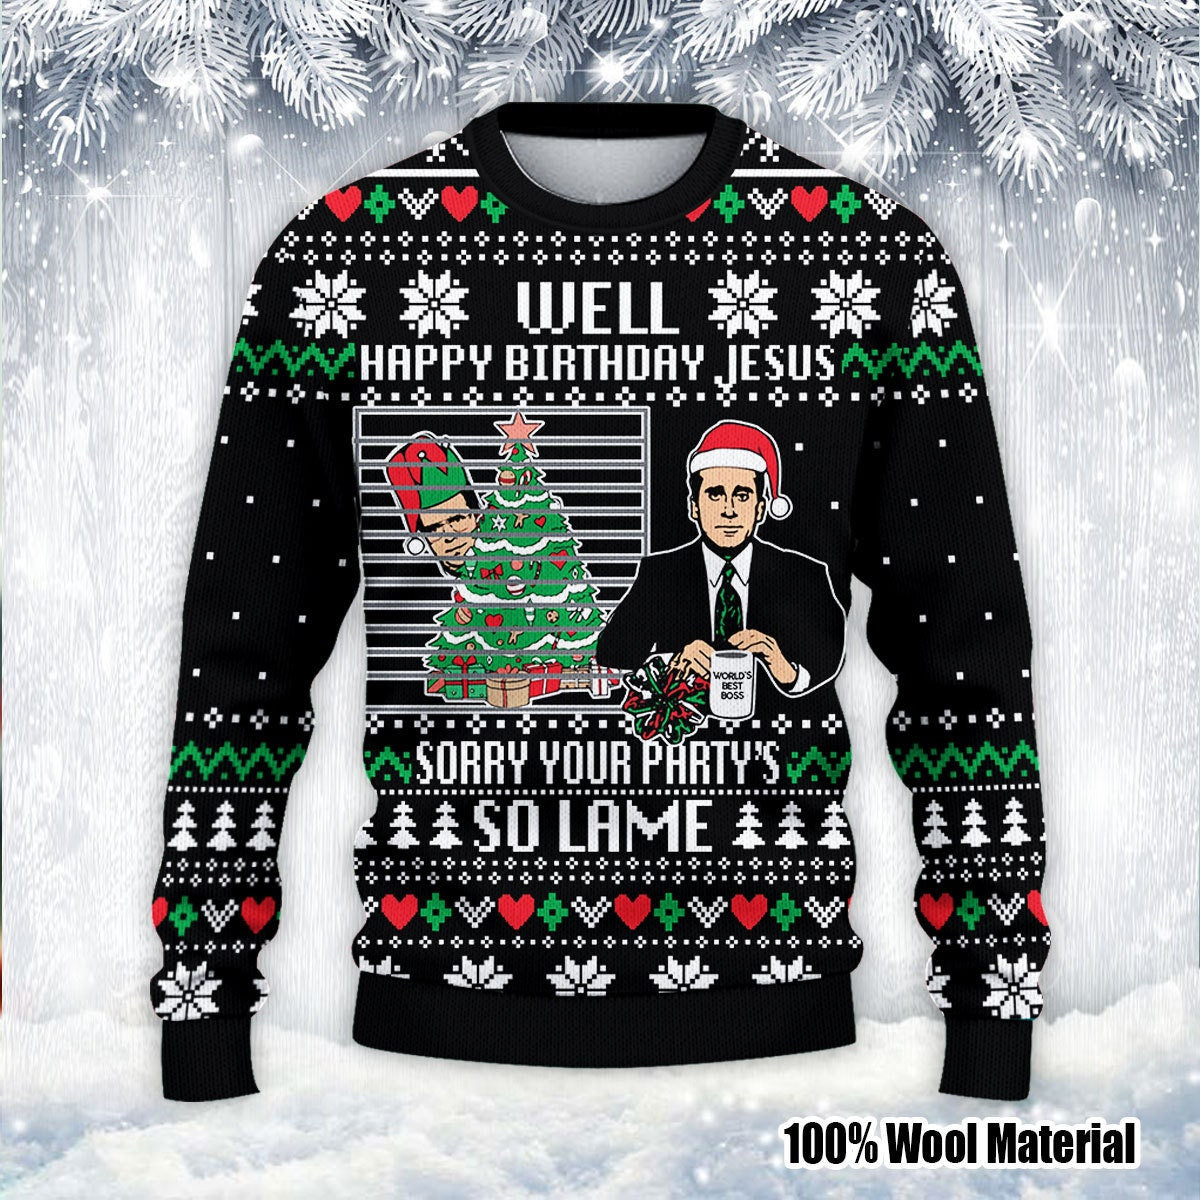 The Office Happy Birthday Jesus Sorry Your Party’s So Lame - Ugly Sweater